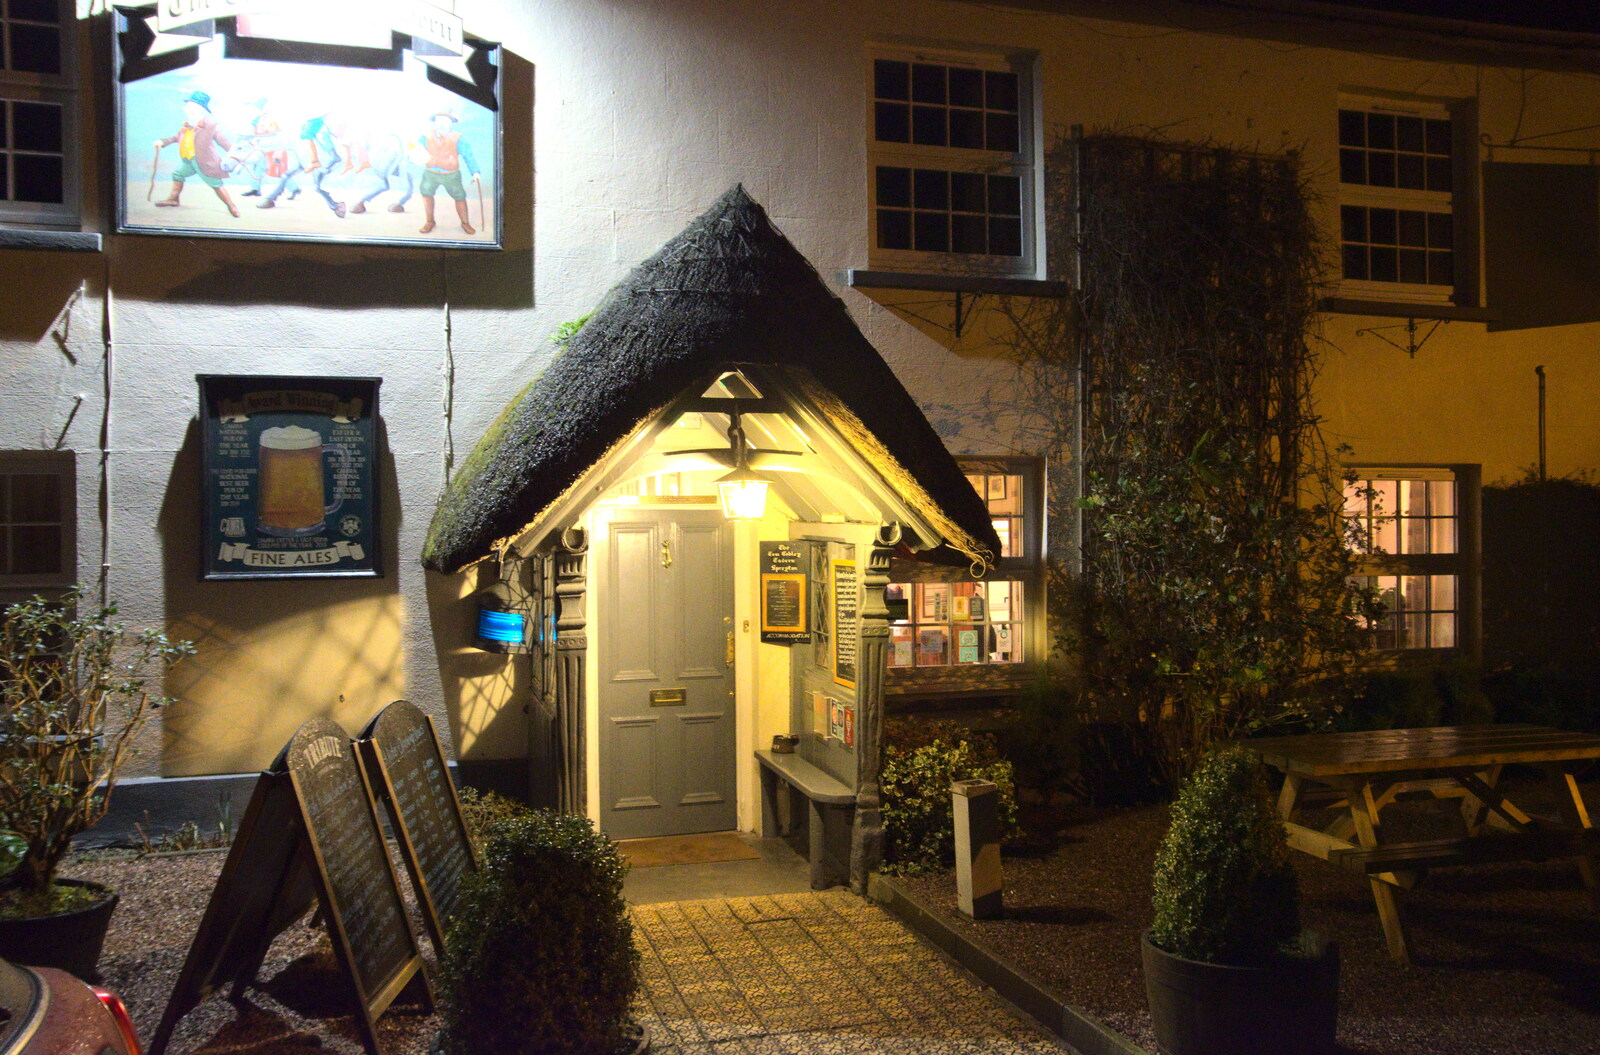 The Cobley, by night from A Short Trip to Spreyton, Devon - 18th January 2020